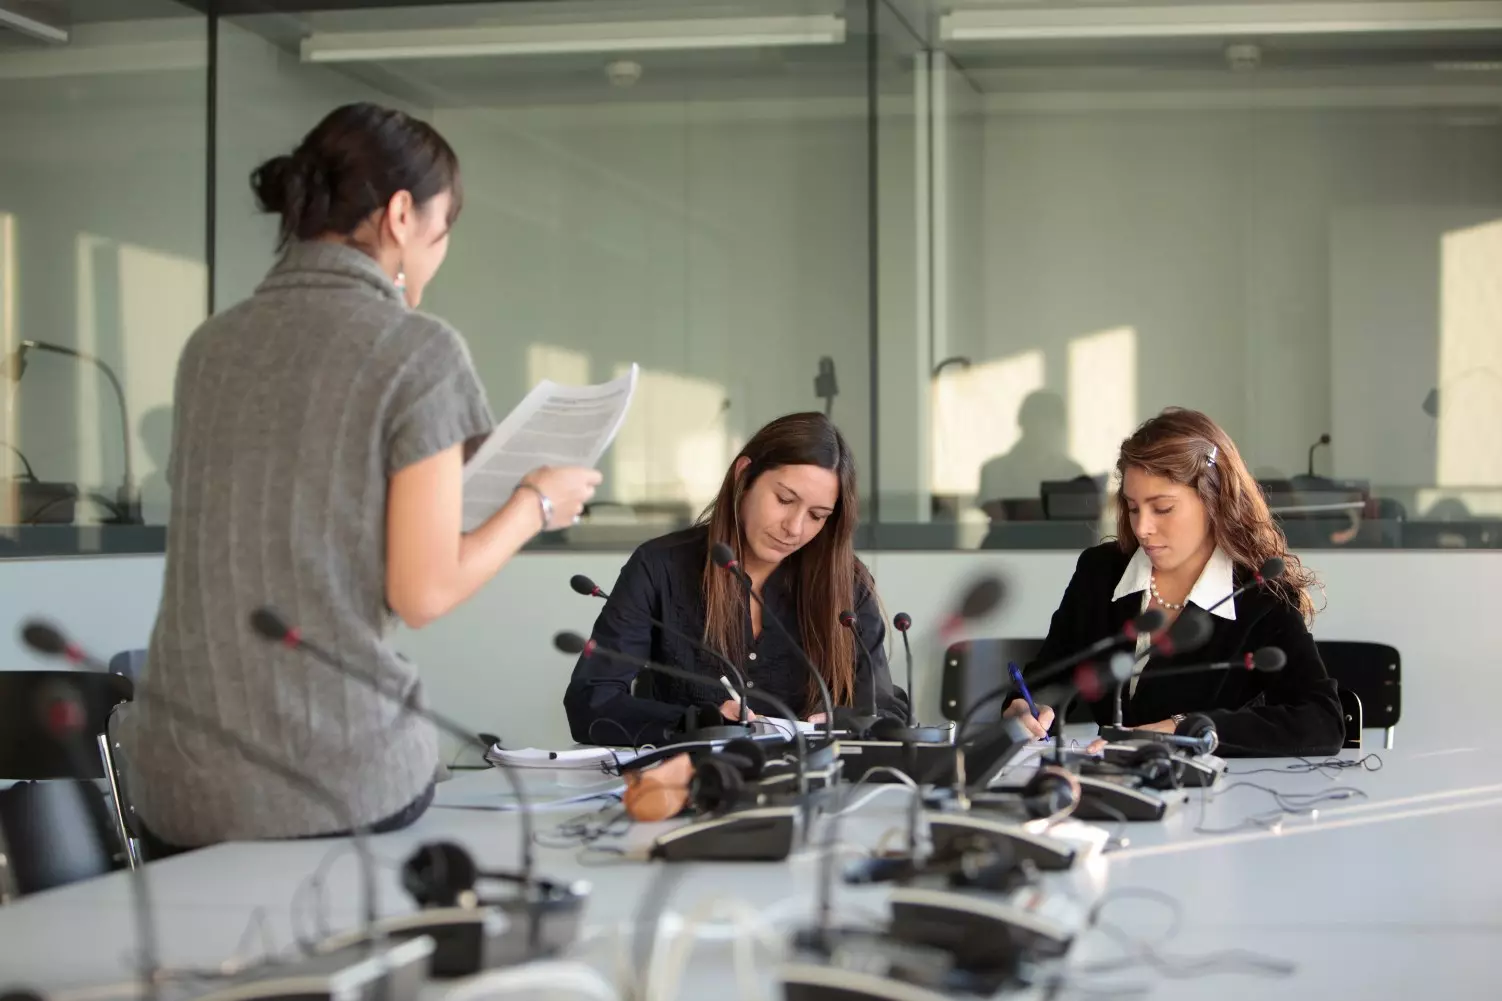 Practising in a real-life setting: future conference interpreters perfect their skills in our modern, specially equipped conference interpreting rooms.